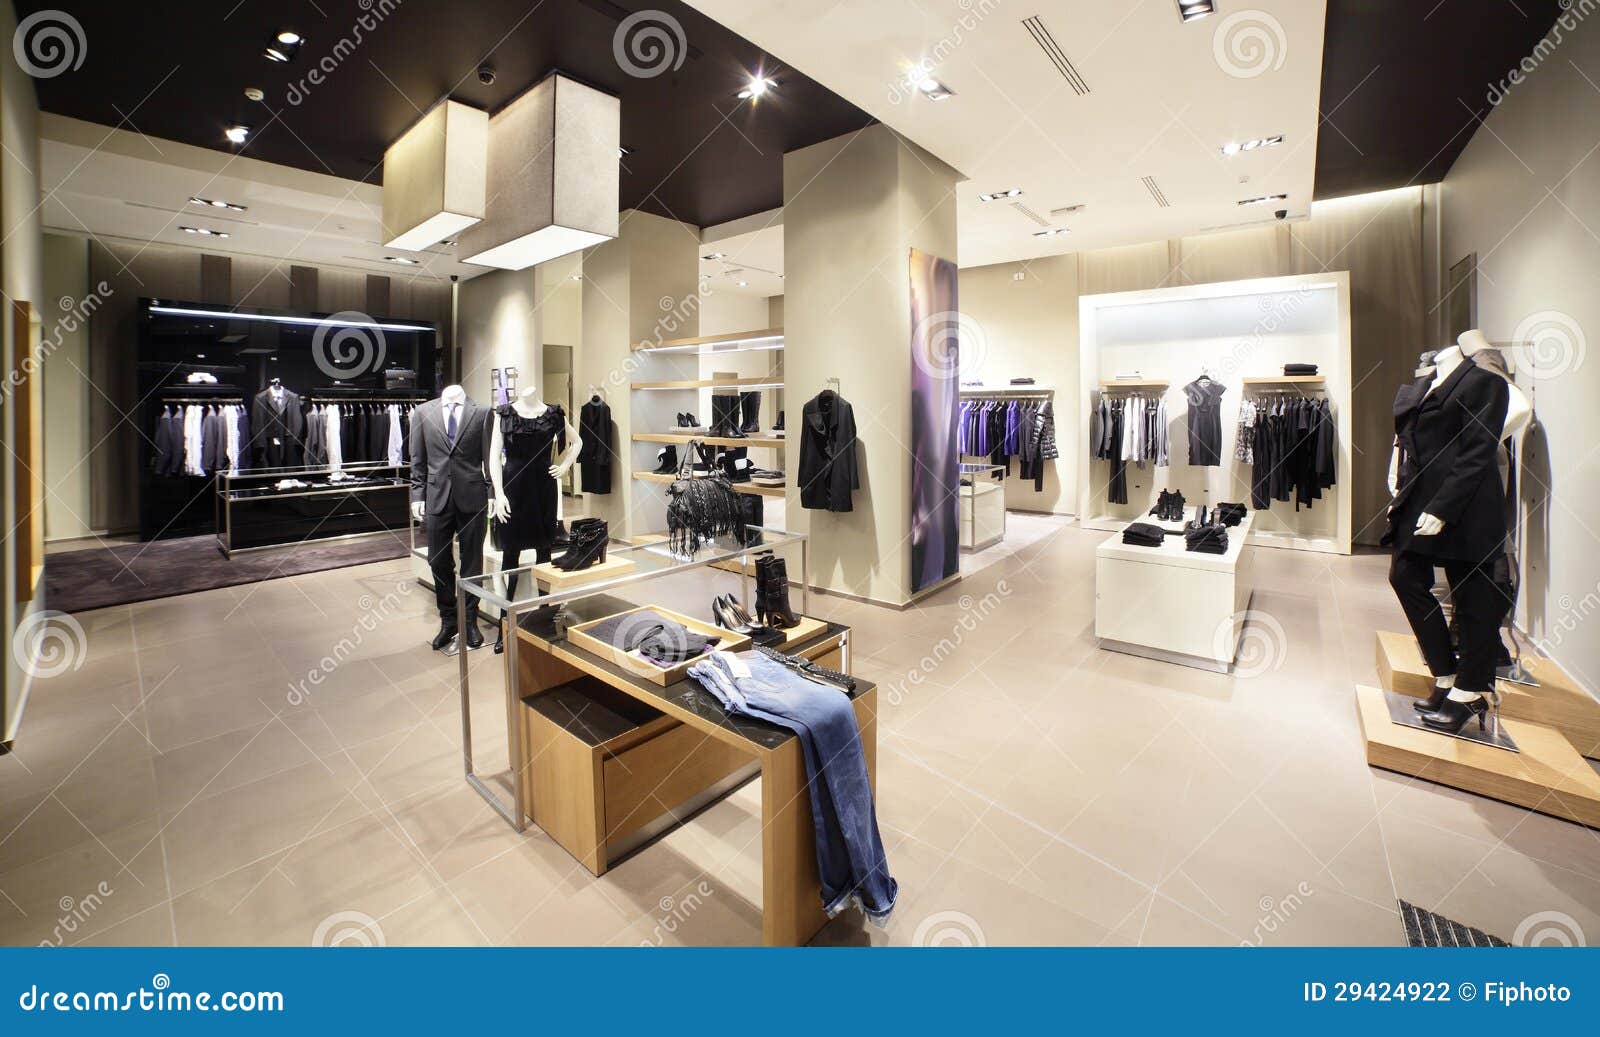 Modern And Fashion Clothes Store Stock Photography - Image: 29424922